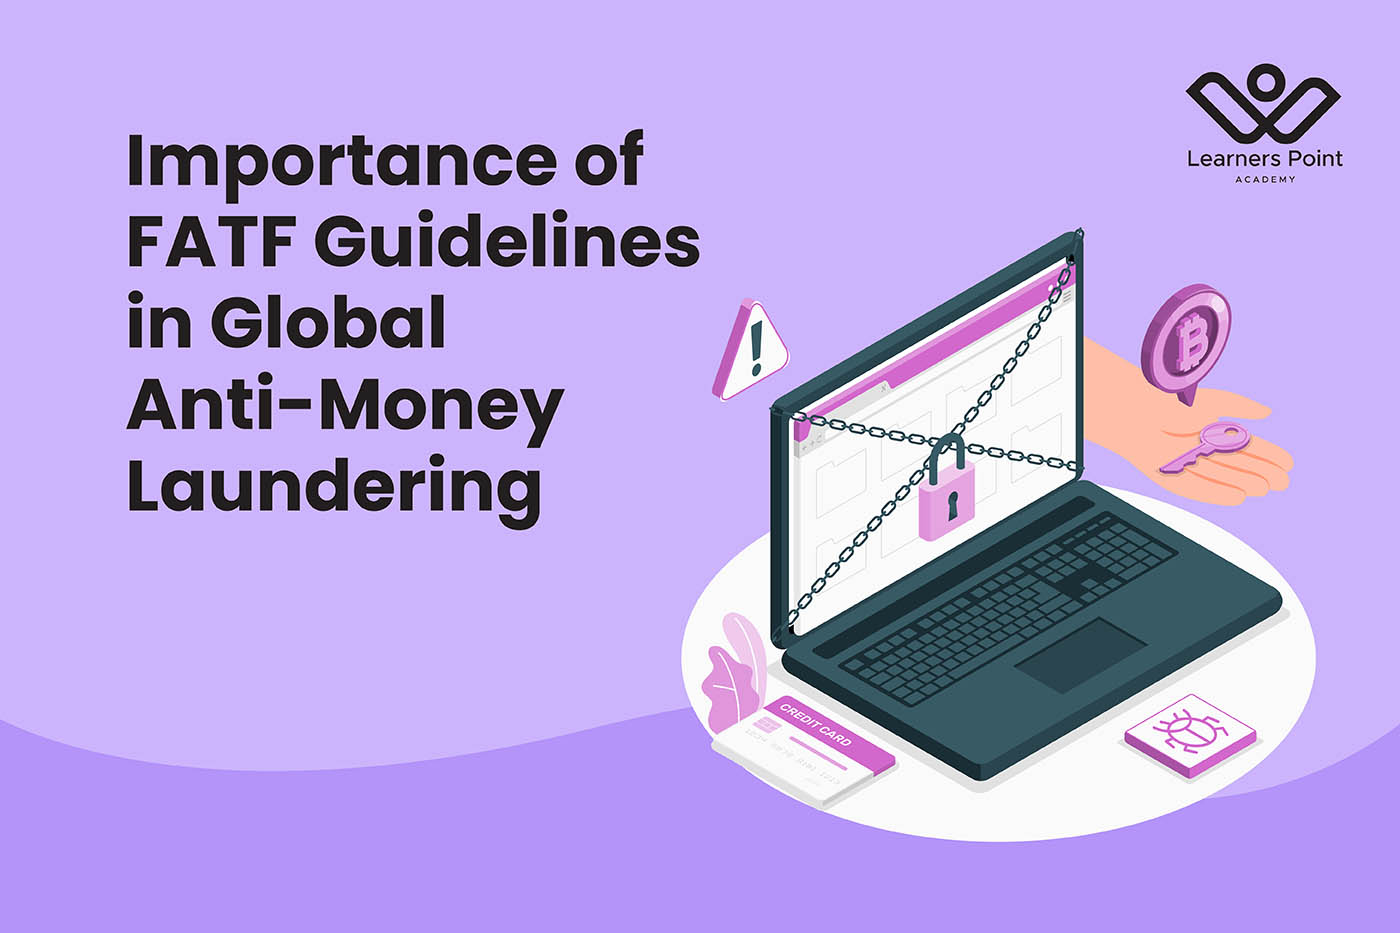 Importance of FATF Guidelines in Global Anti-Money Laundering